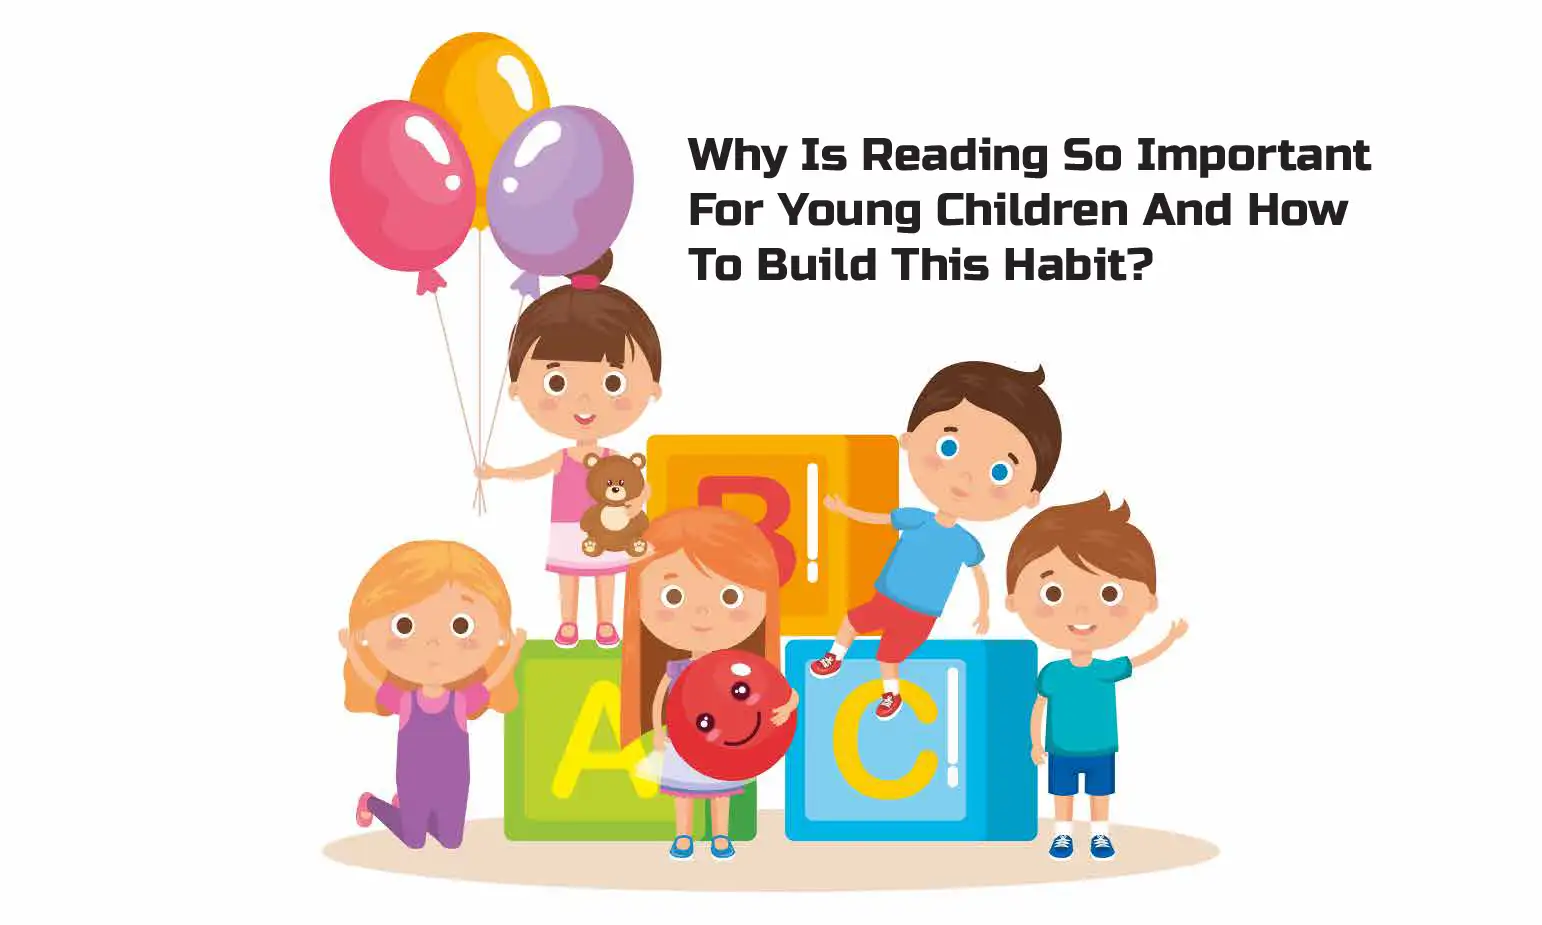 Why Is Reading So Important For Young Children And How To Build This Habit?